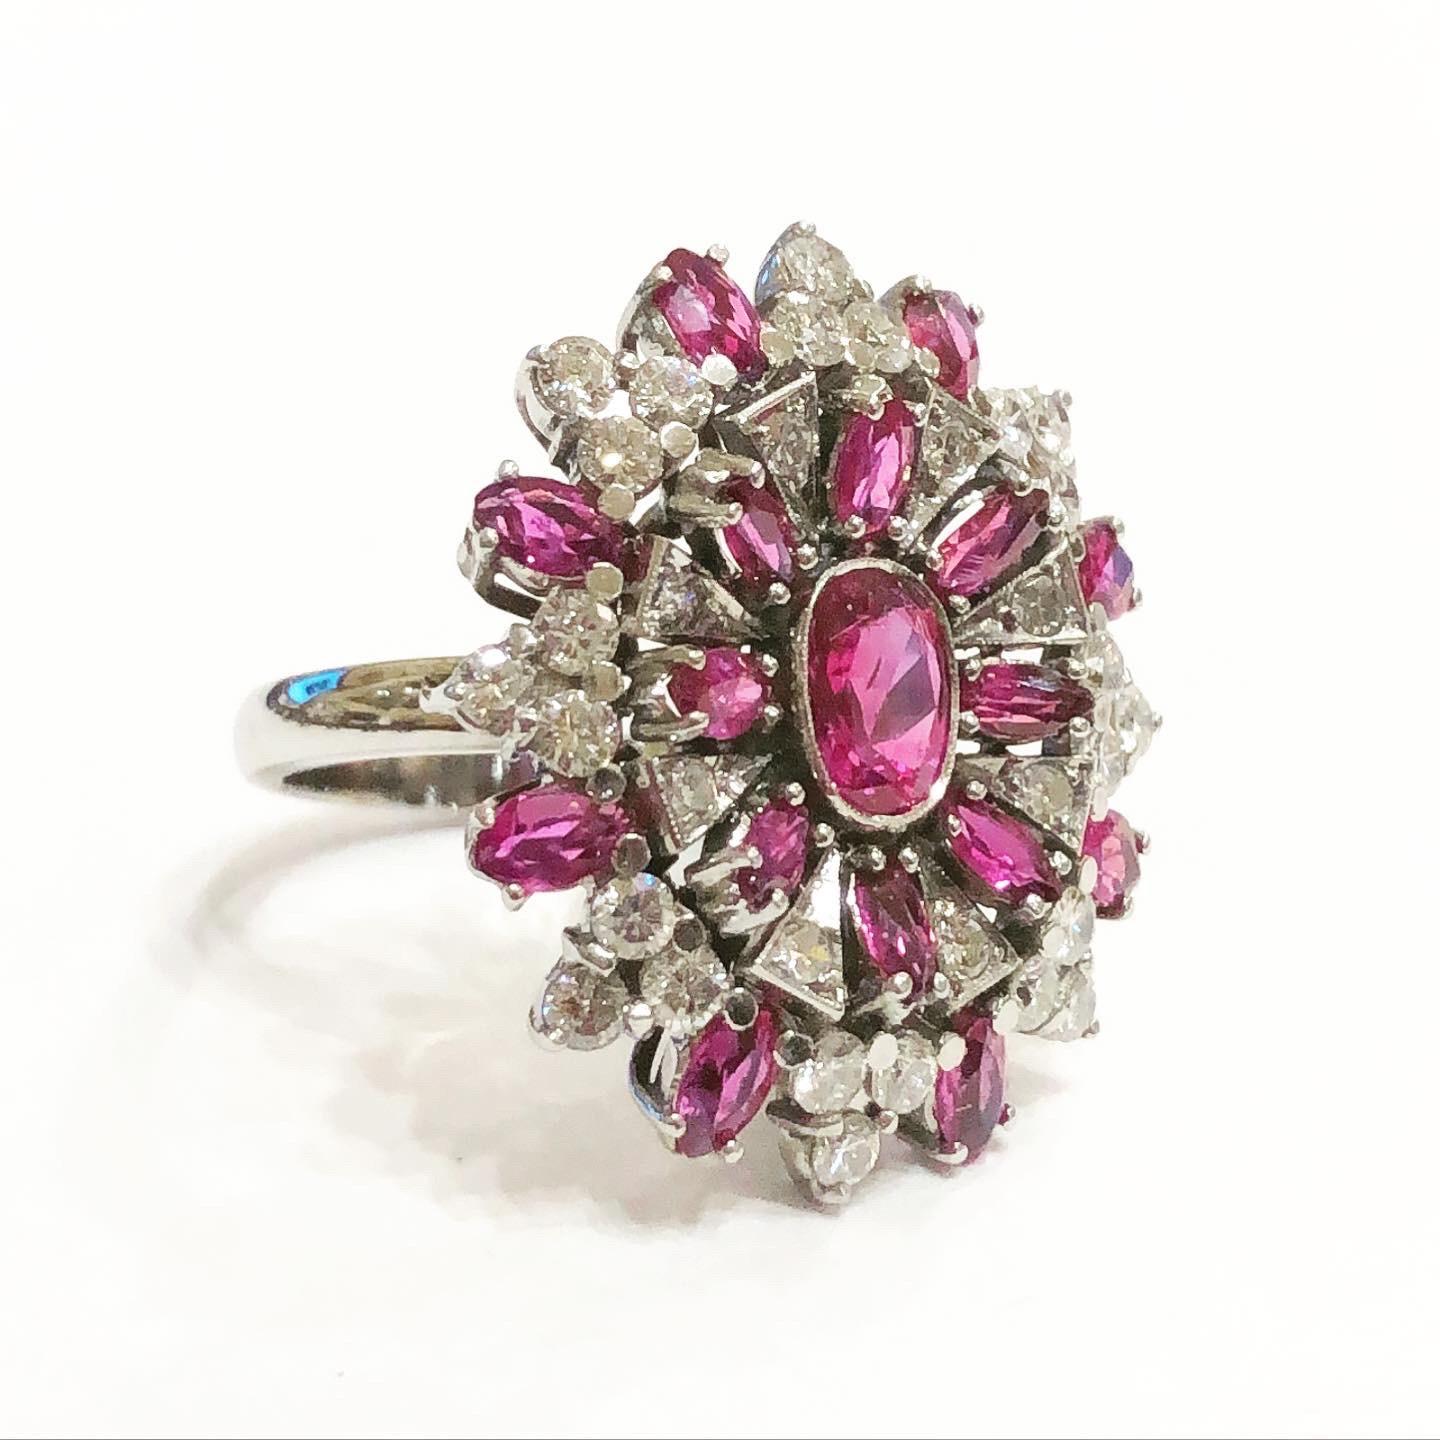 1950s diamonds rubys white gold cocktail ring.
Condition:Good.. 
18 karat white gold.
Oval cut rubys.
Brilliant cut  diamonds.
Diamond approximate carat weight: 0.9 carat.
Ruby approximate  weight: 3 carat.
Size: 6.75. It can be resized.
Height: 